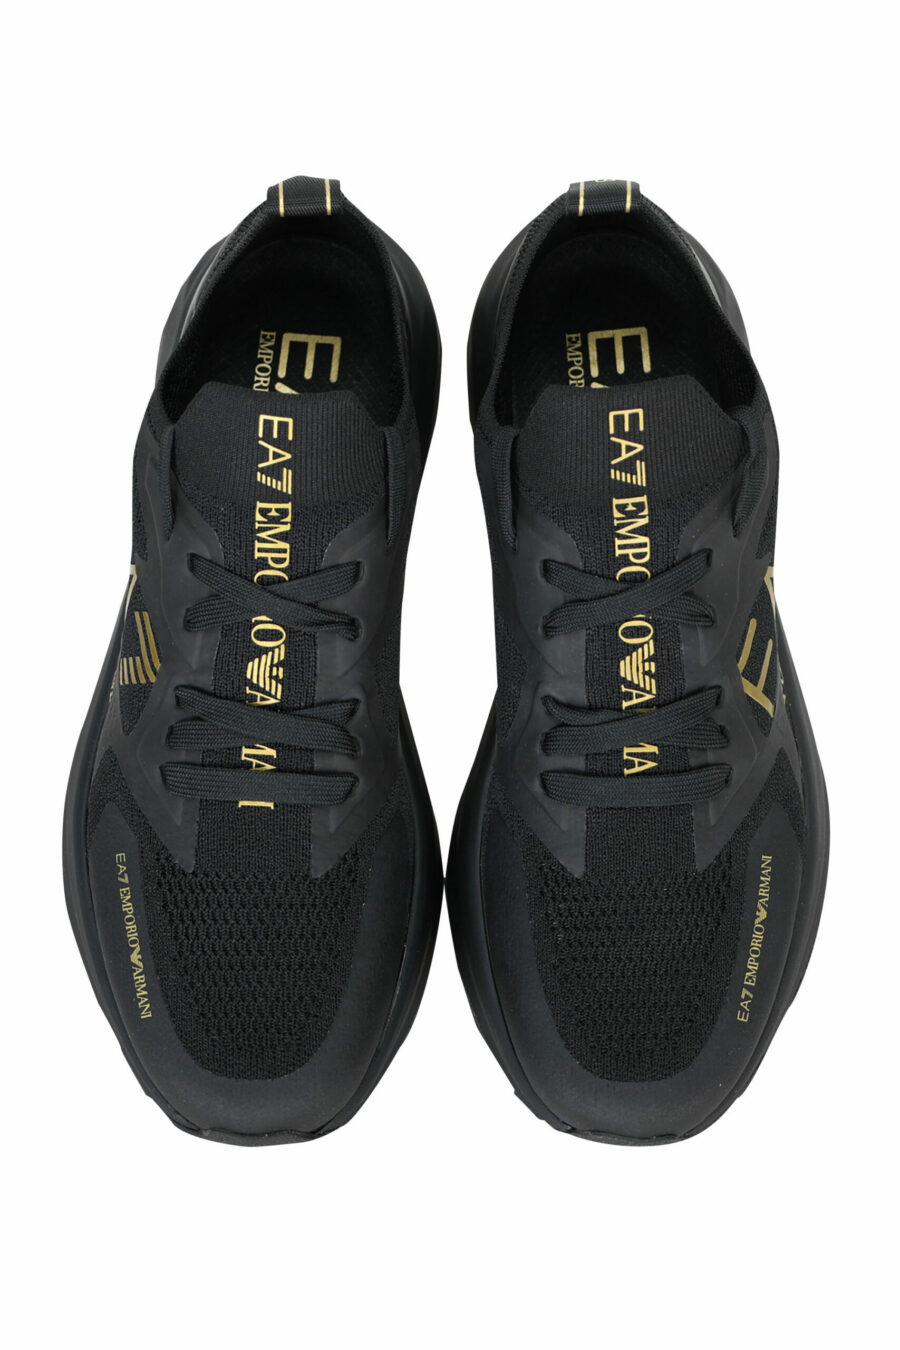 Black trainers with gold "lux identity" maxilogo and black sole - 8059515428016 4 scaled